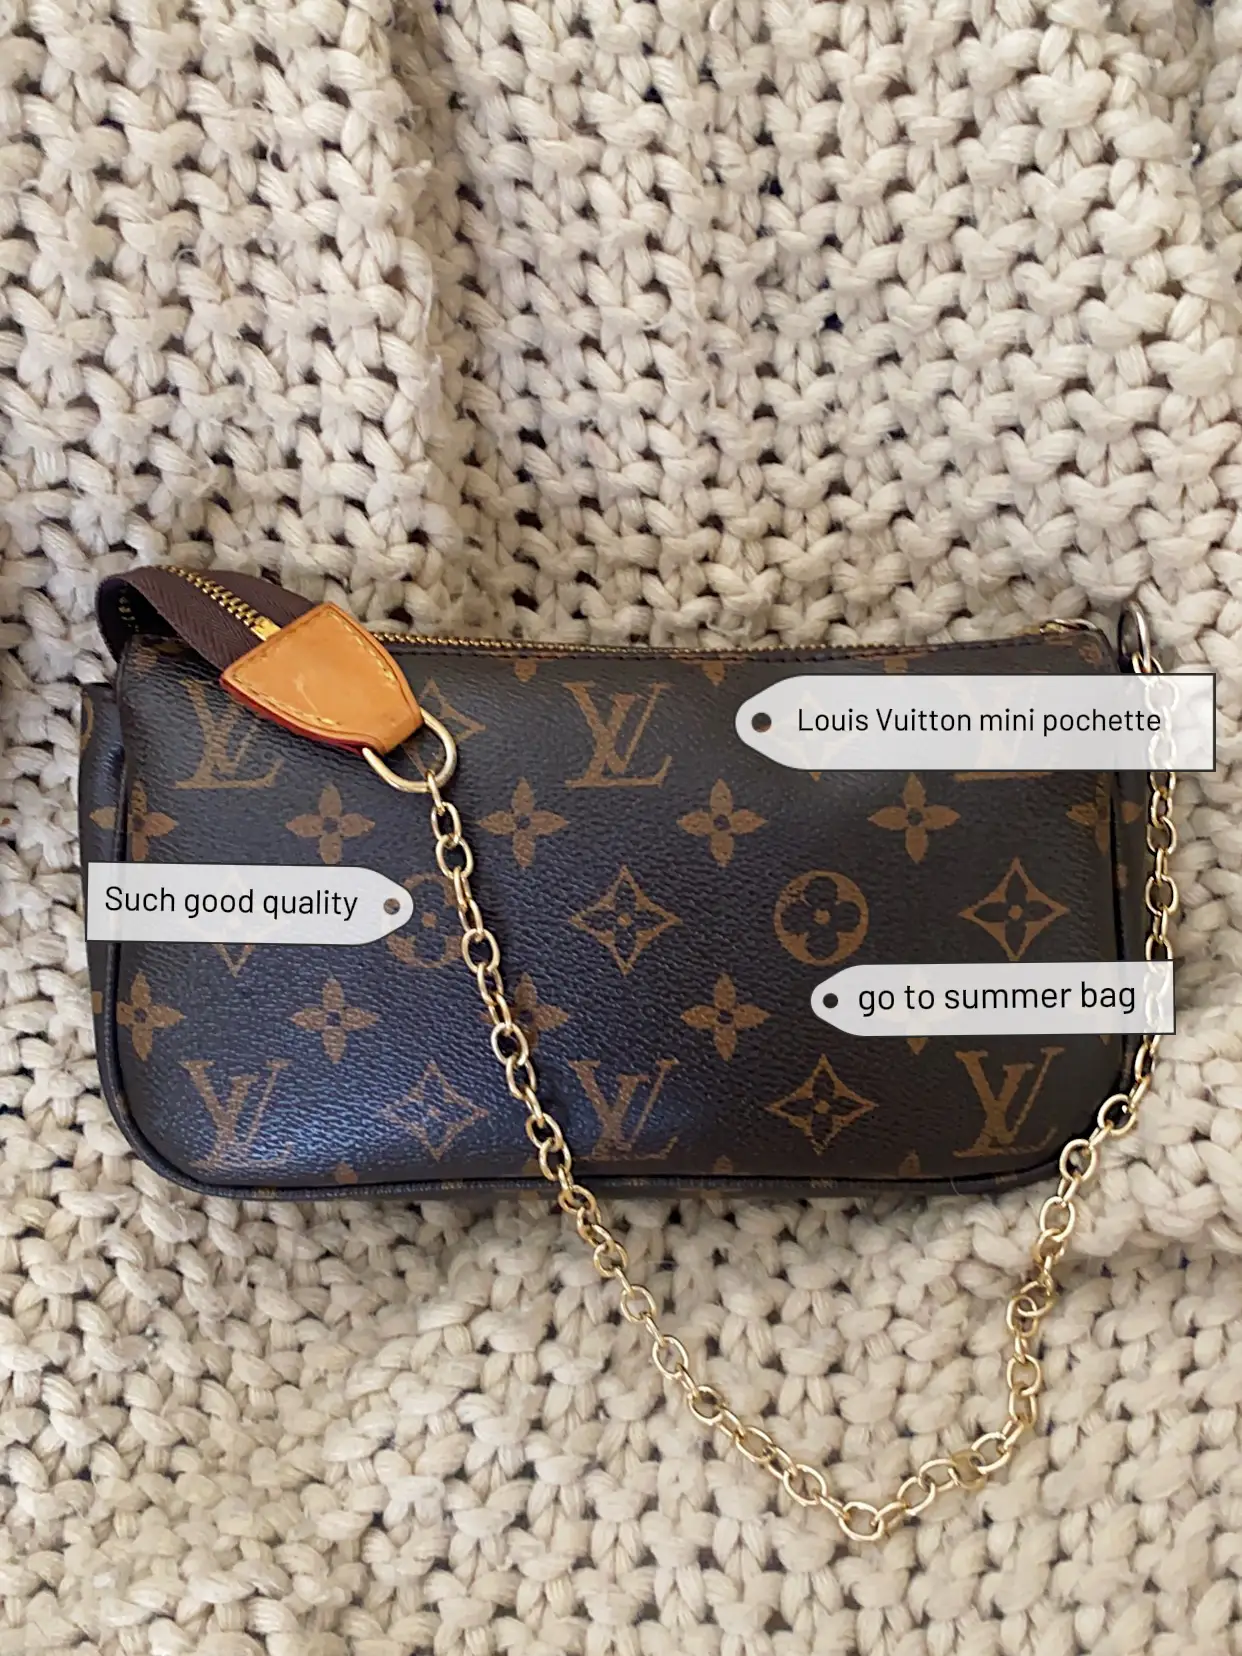 DhGate Finds - Louis Vuitton Bag Designer Dupe Unboxing - Another Great  Seller To Share! 